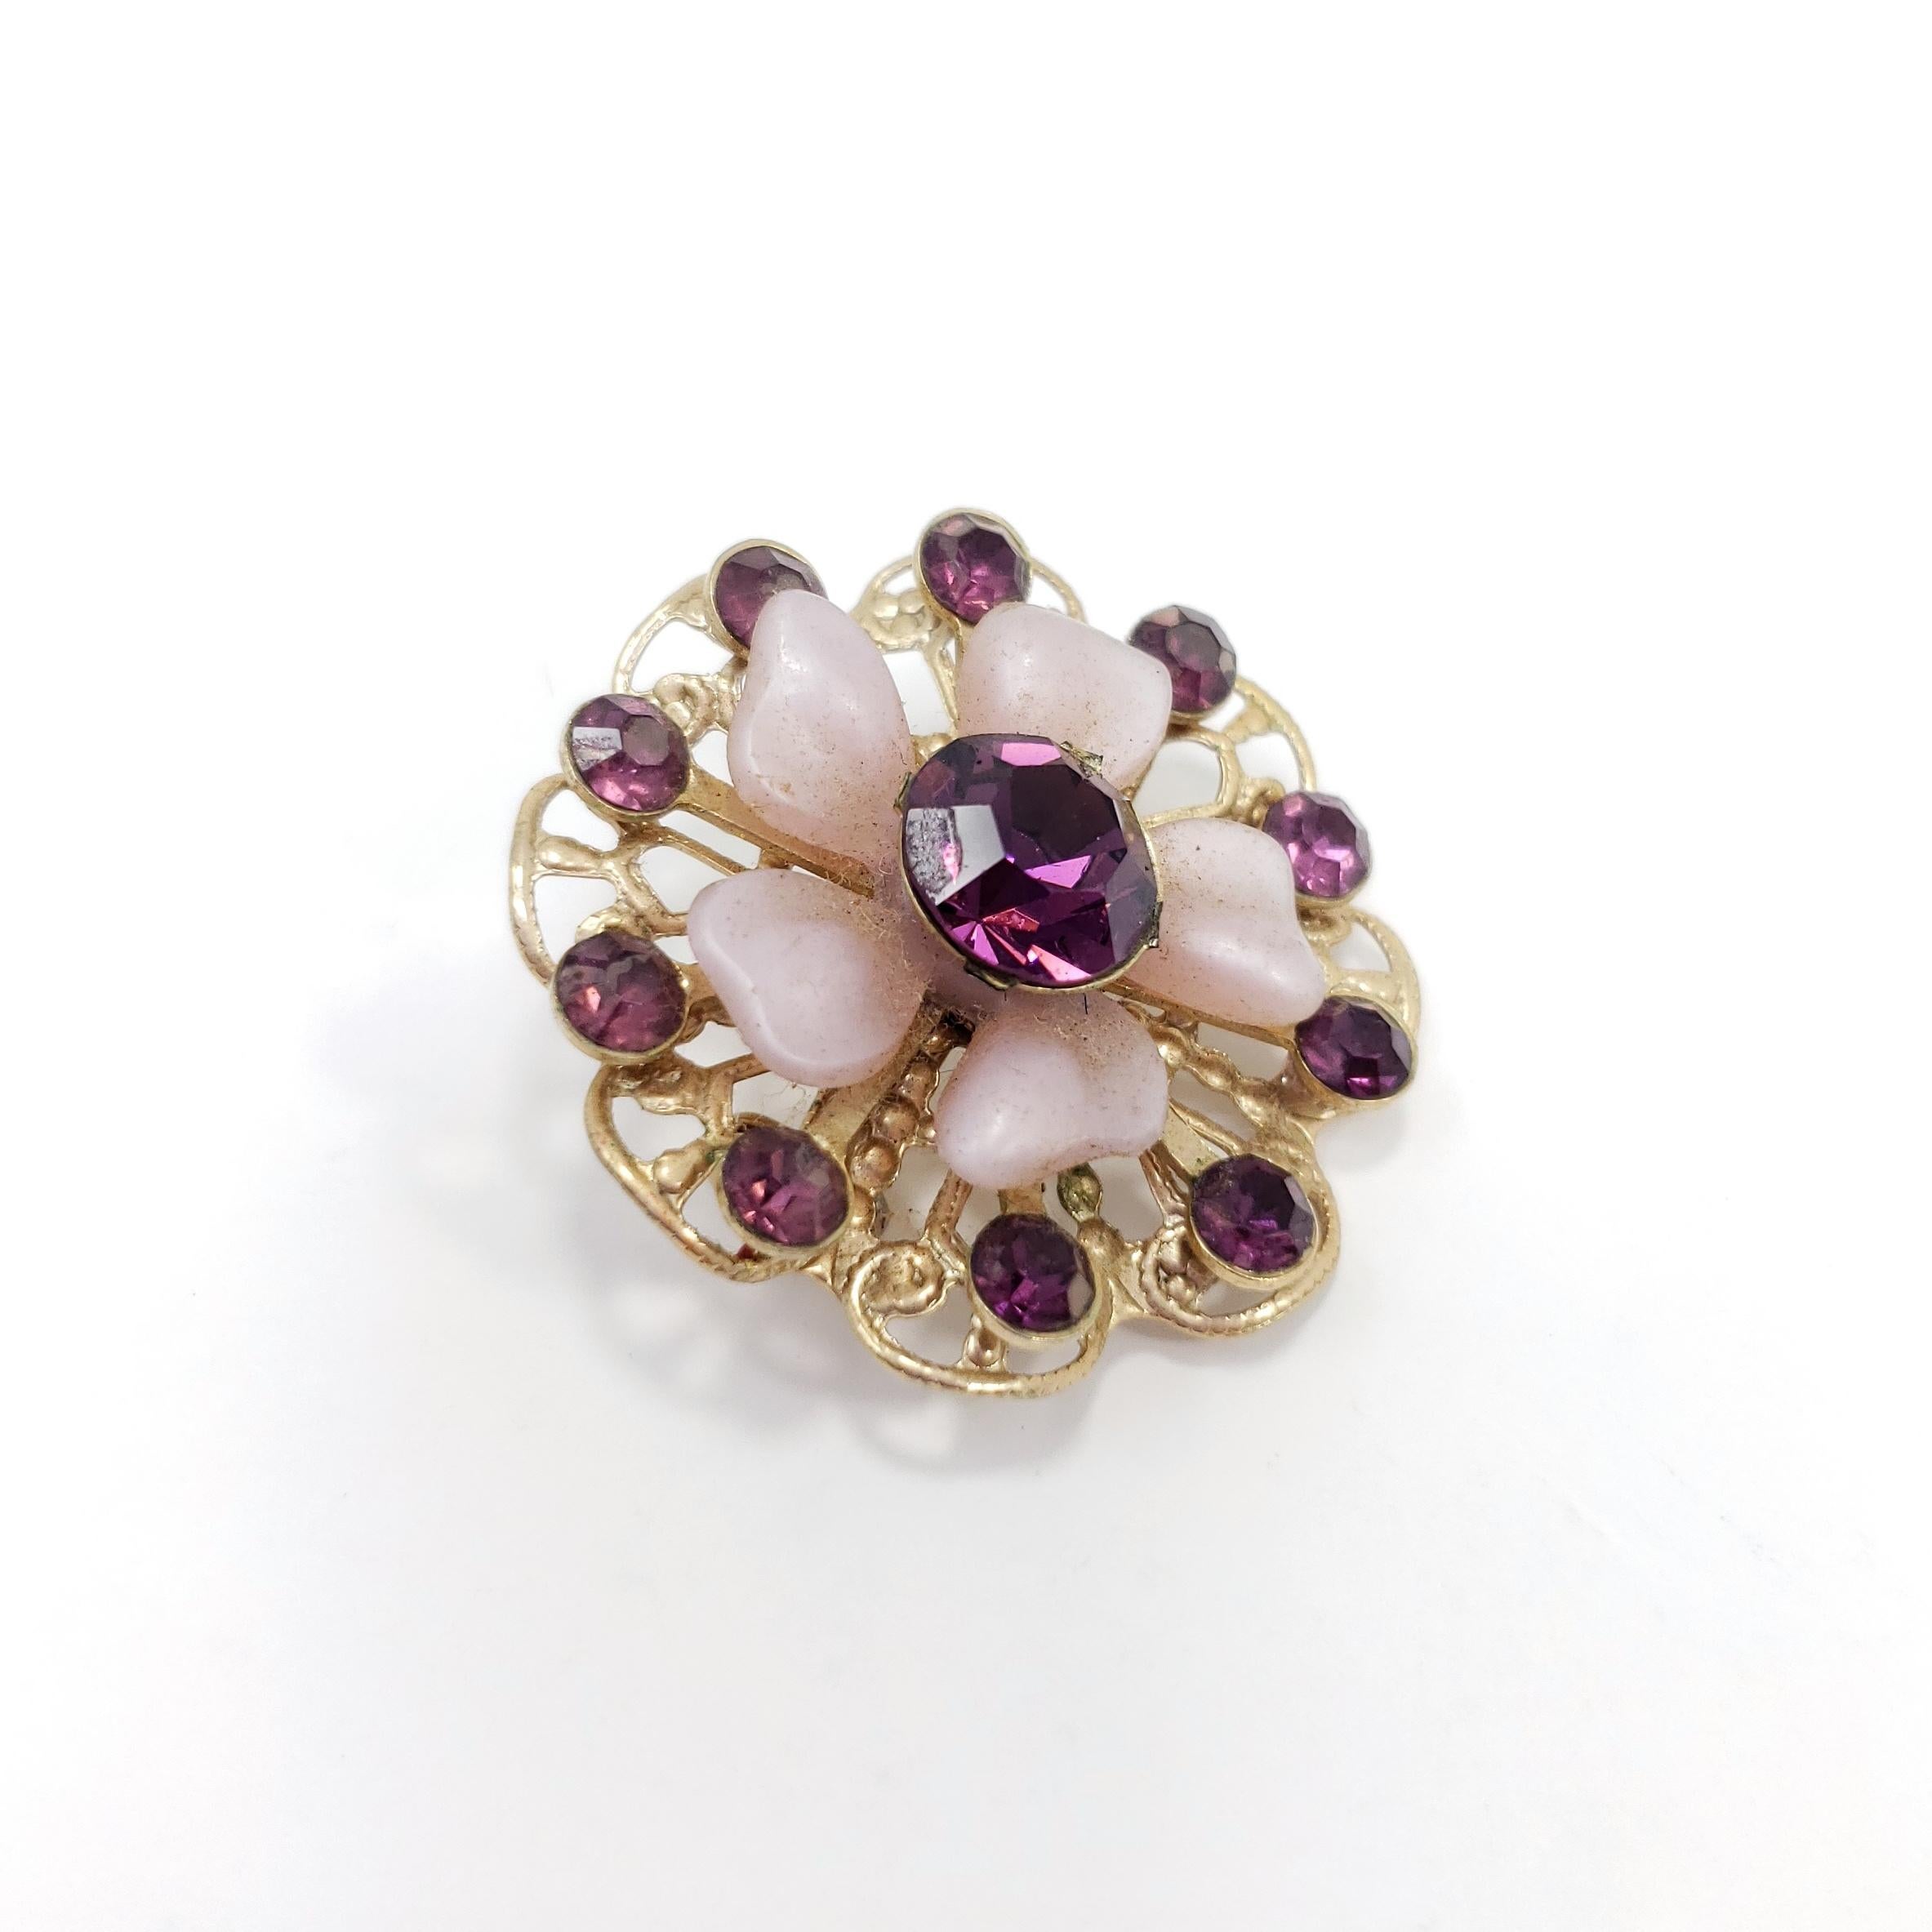 A stylish brooch with amethyst crystals and lilac petals, set in a filigree-style gold-plated setting.